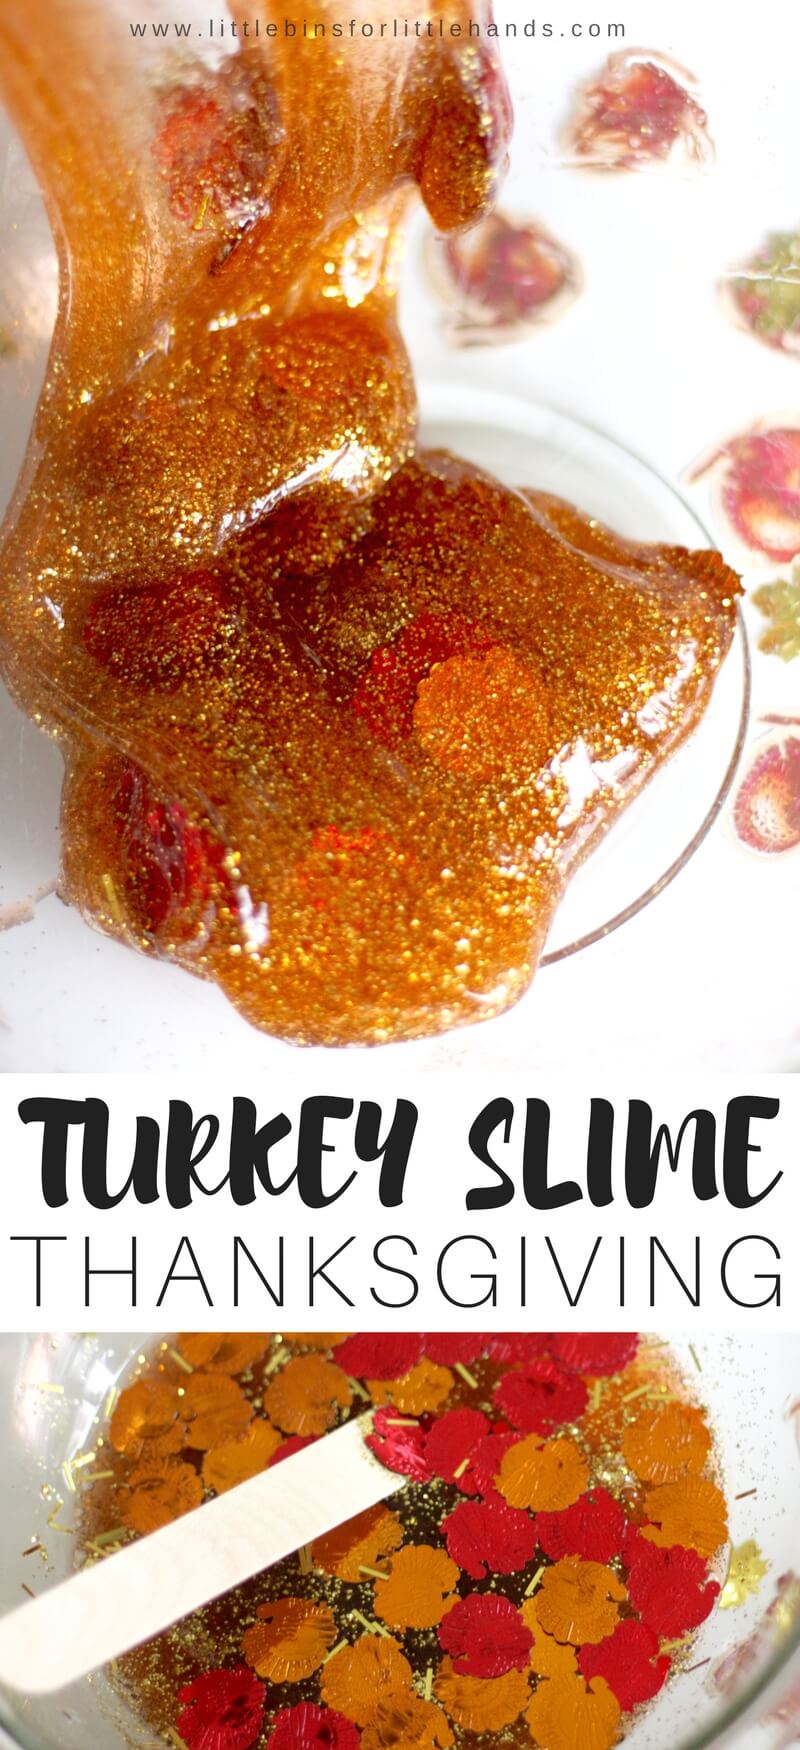 Totally turkey Thanksgiving slime recipe with turkey confetti! Use our basic homemade slime recipes to make a turkey themed Thanksgiving slime that isn't gravy. Have fun with this Thanksgiving science activity and sensory play idea this fall! You can use our homemade saline solution slime recipe, liquid starch slime recipe, or borax slime recipe for making fun and festive holiday slime ideas any day of the year!